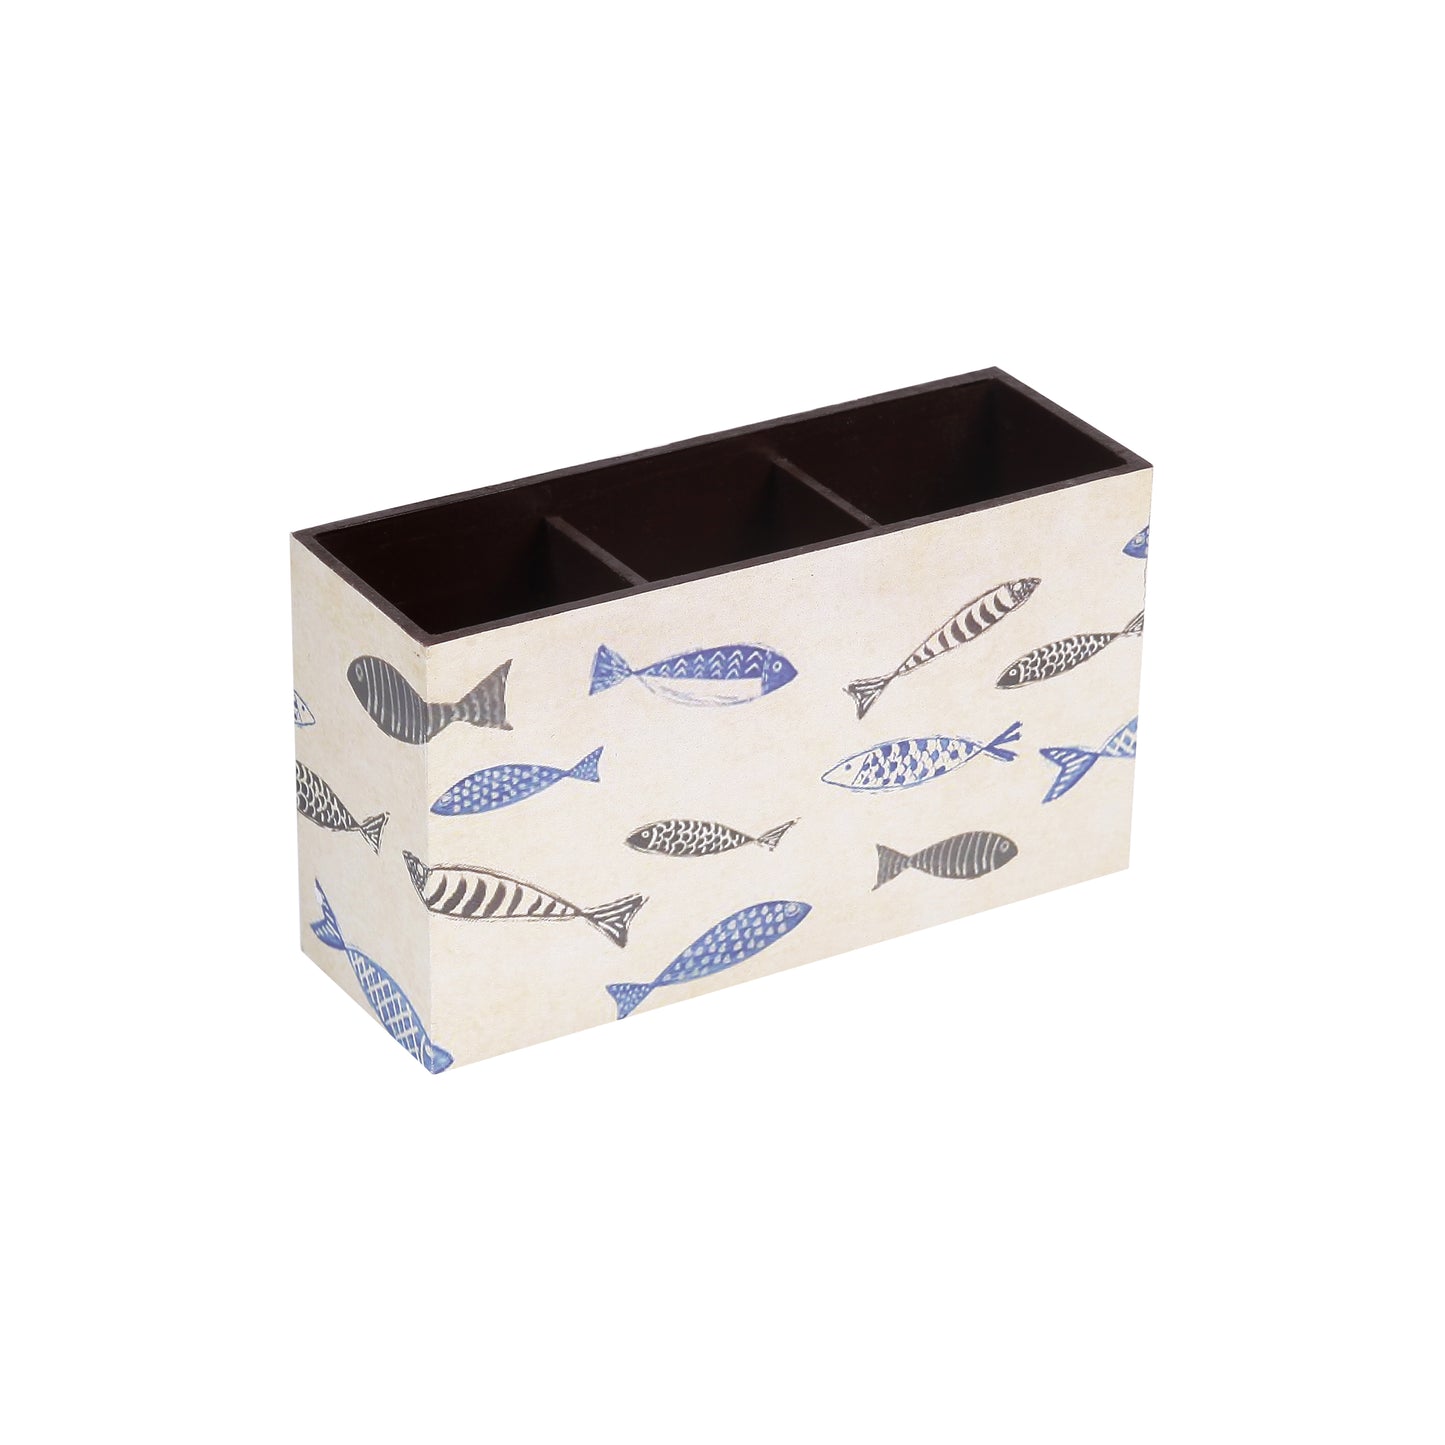 A Tiny Mistake Fish Wooden Cutlery Holder, 18 x 10 x 6.5 cm